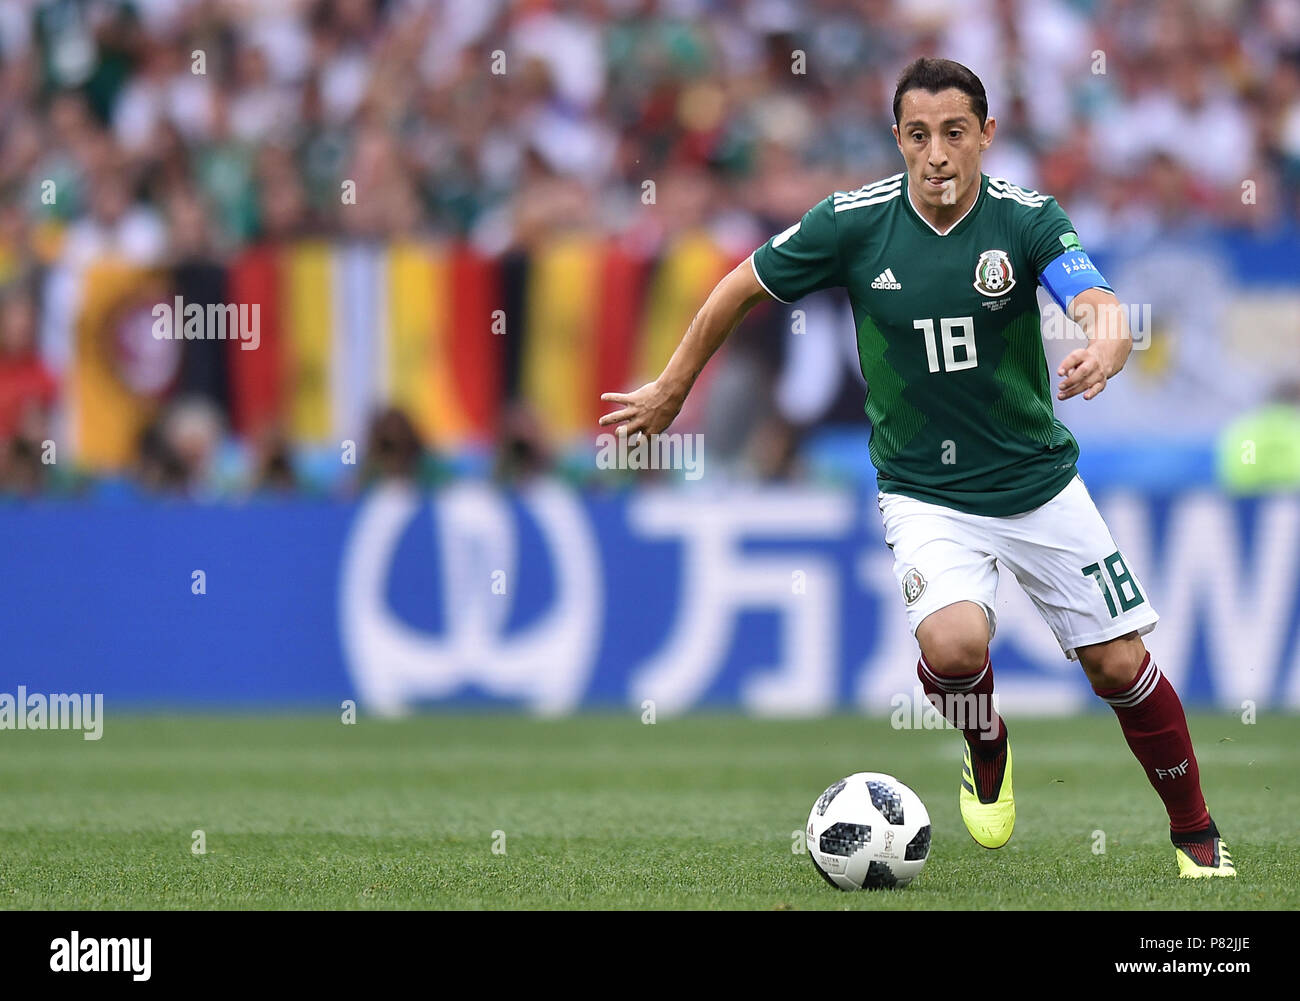 MOSCOW, RUSSIA - JUNE 17: Andres Guardado of Mexico in action during the 2018 FIFA World Cup Russia group F match between Germany and Mexico at Luzhniki Stadium on June 17, 2018 in Moscow, Russia. (Photo by Lukasz Laskowski/PressFocus/MB Media) Stock Photo